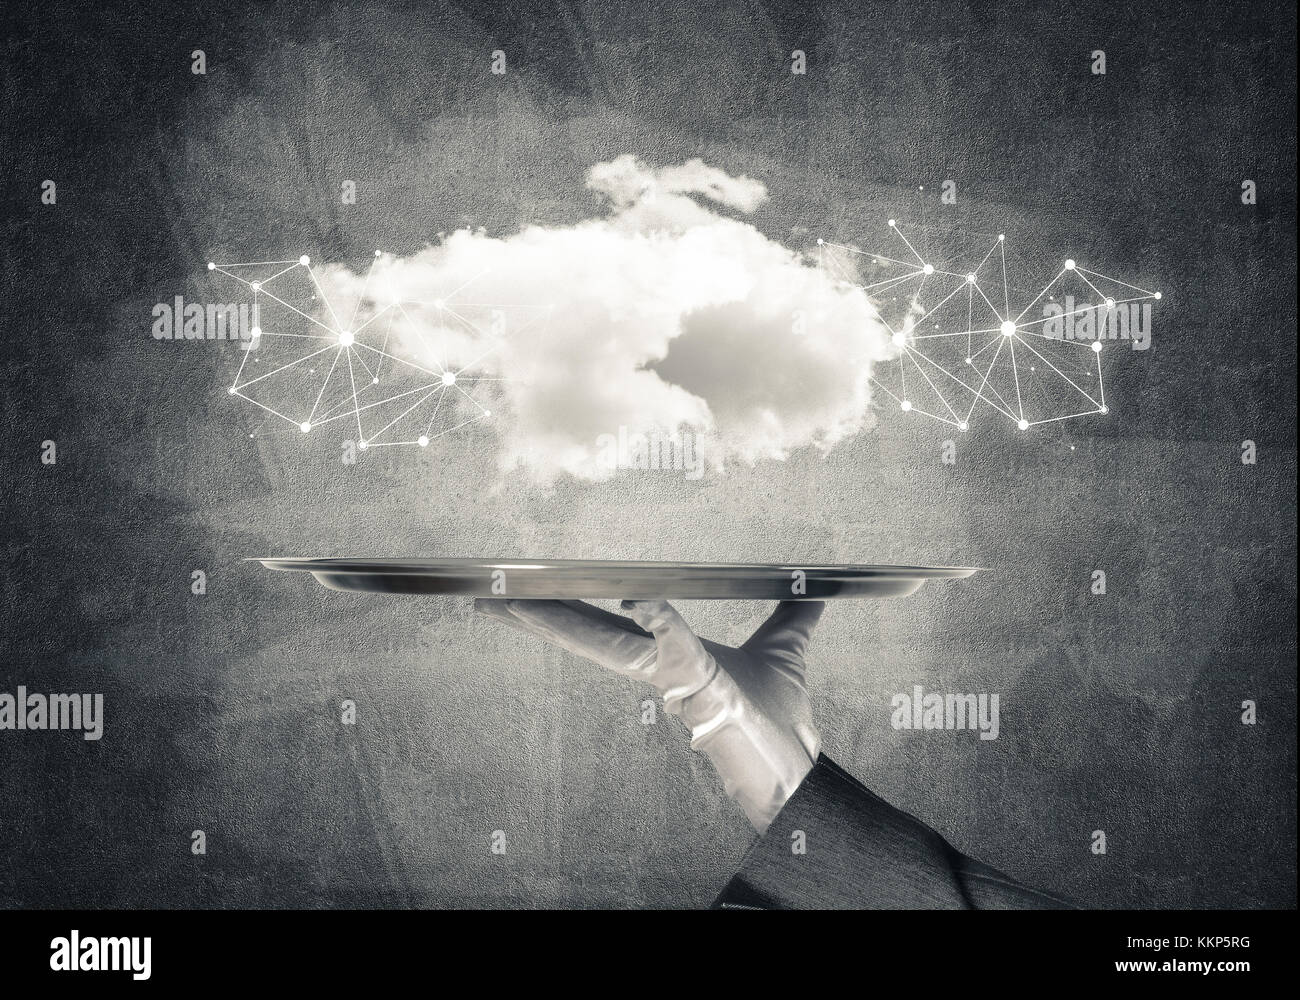 Cropped image of waitress's hand in white glove presenting cloud with social media network structure on metal tray. Gray wall on background. 3D render Stock Photo